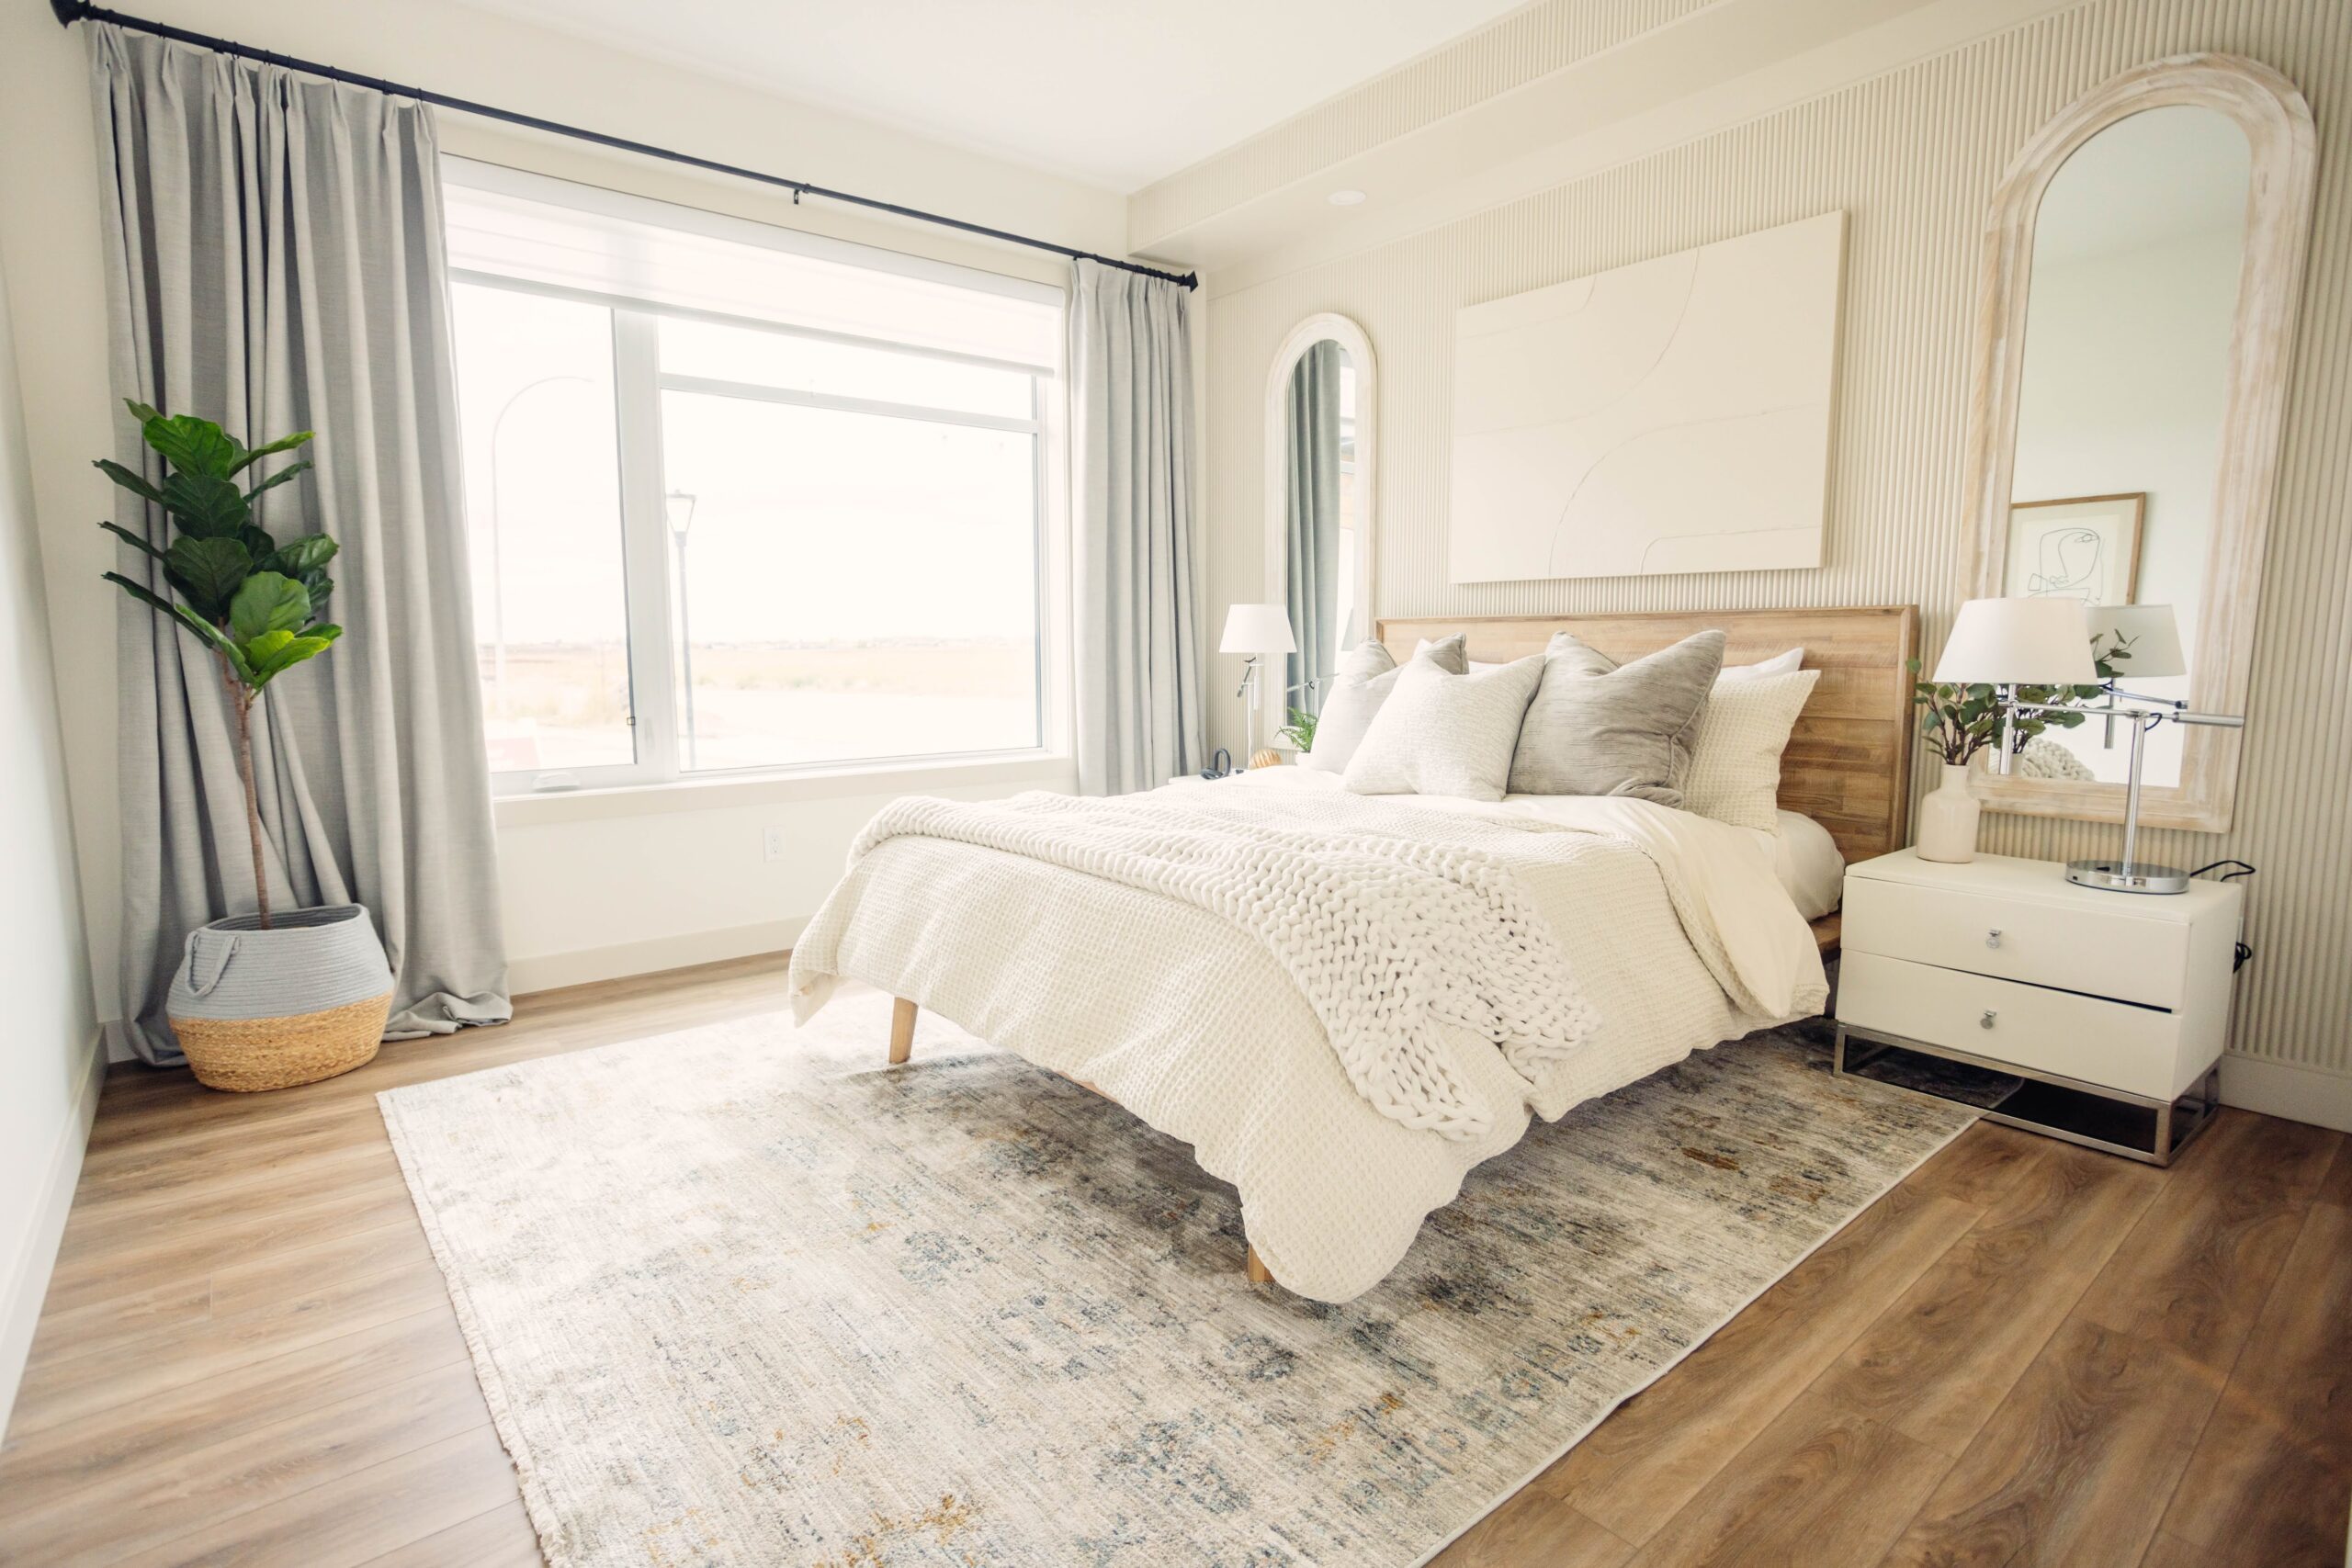 A bedroom with wooden floors and a white bed.